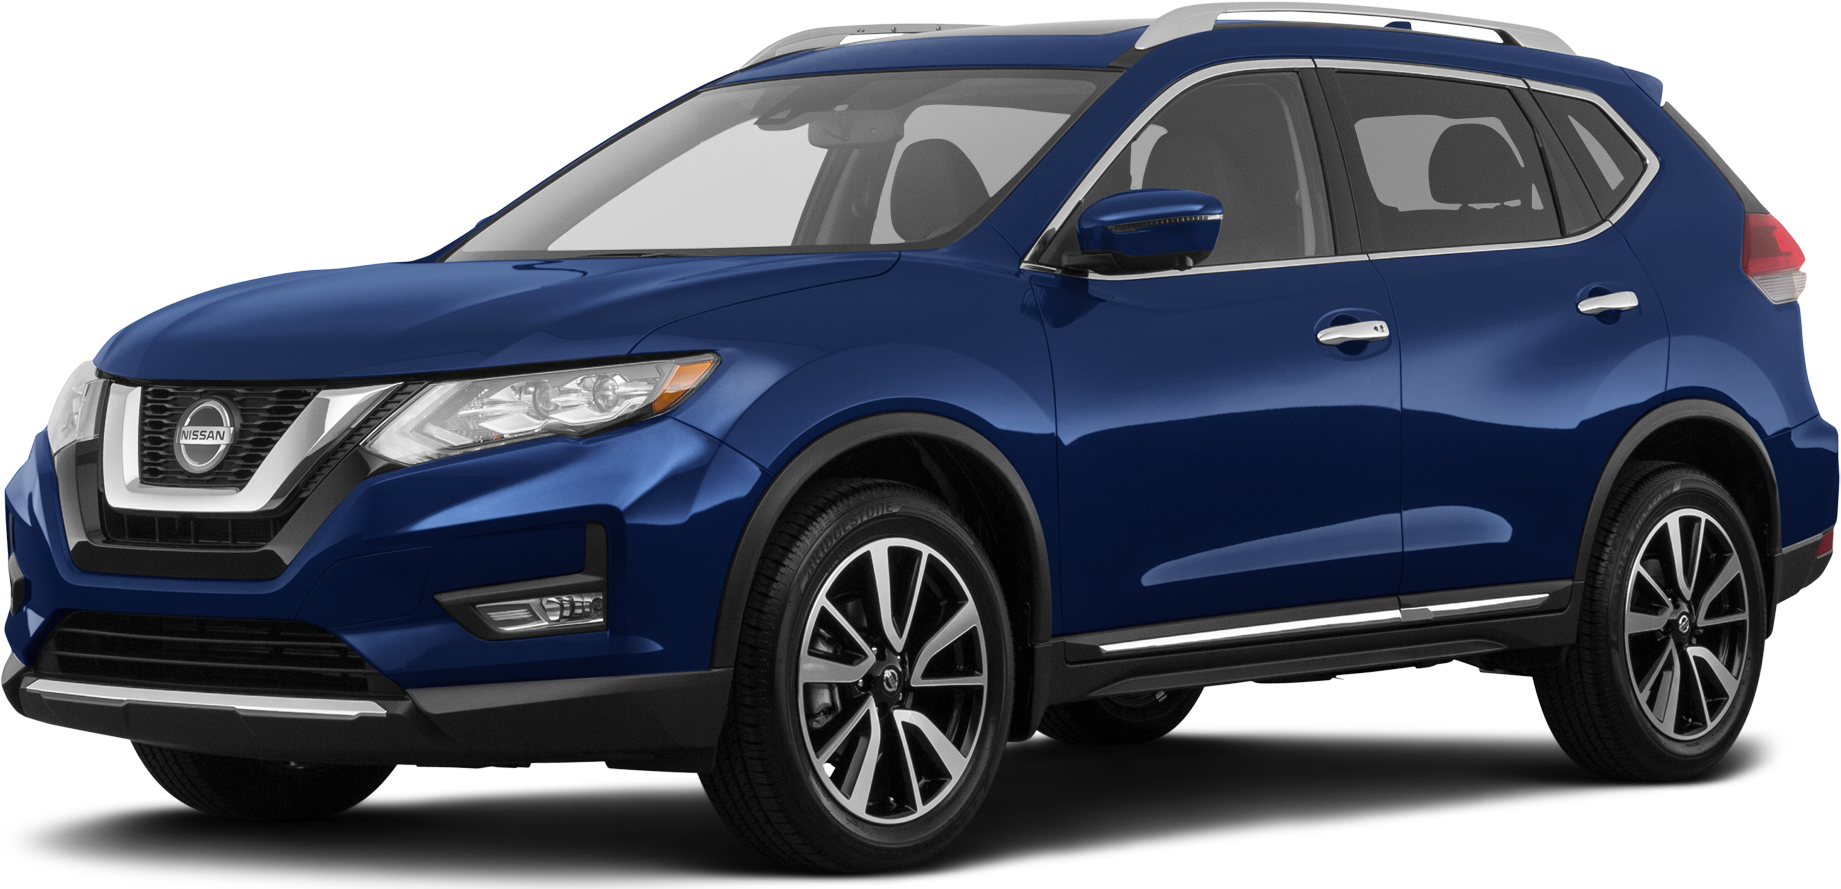 2020 Nissan Rogue Values & Cars for Sale Kelley Blue Book